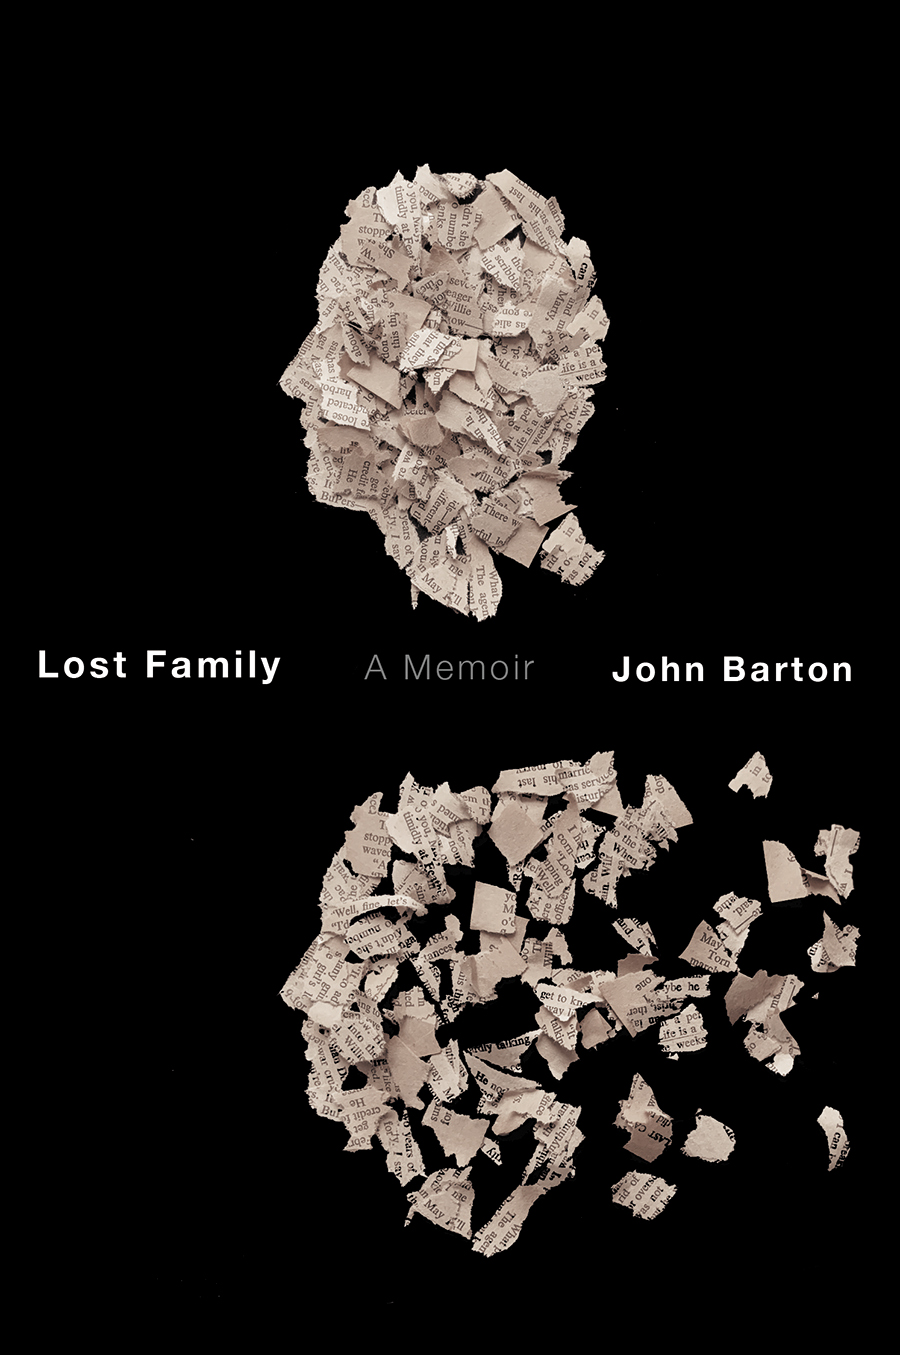 Lost Family